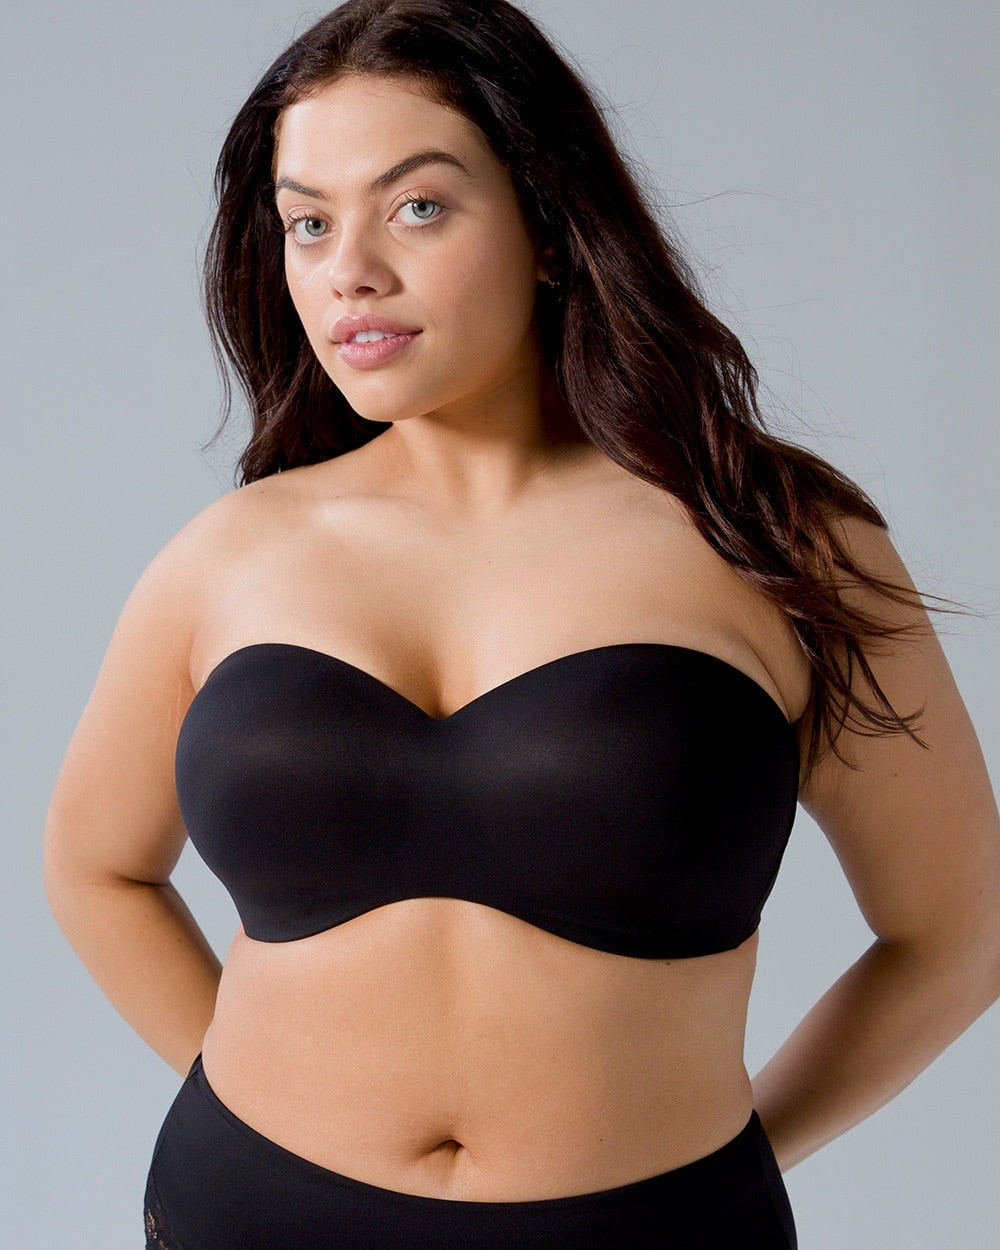 WOMEN'S PLUS SIZE BANDEAU WIRE FREE SHIRRED CENTER TUBE BRAS